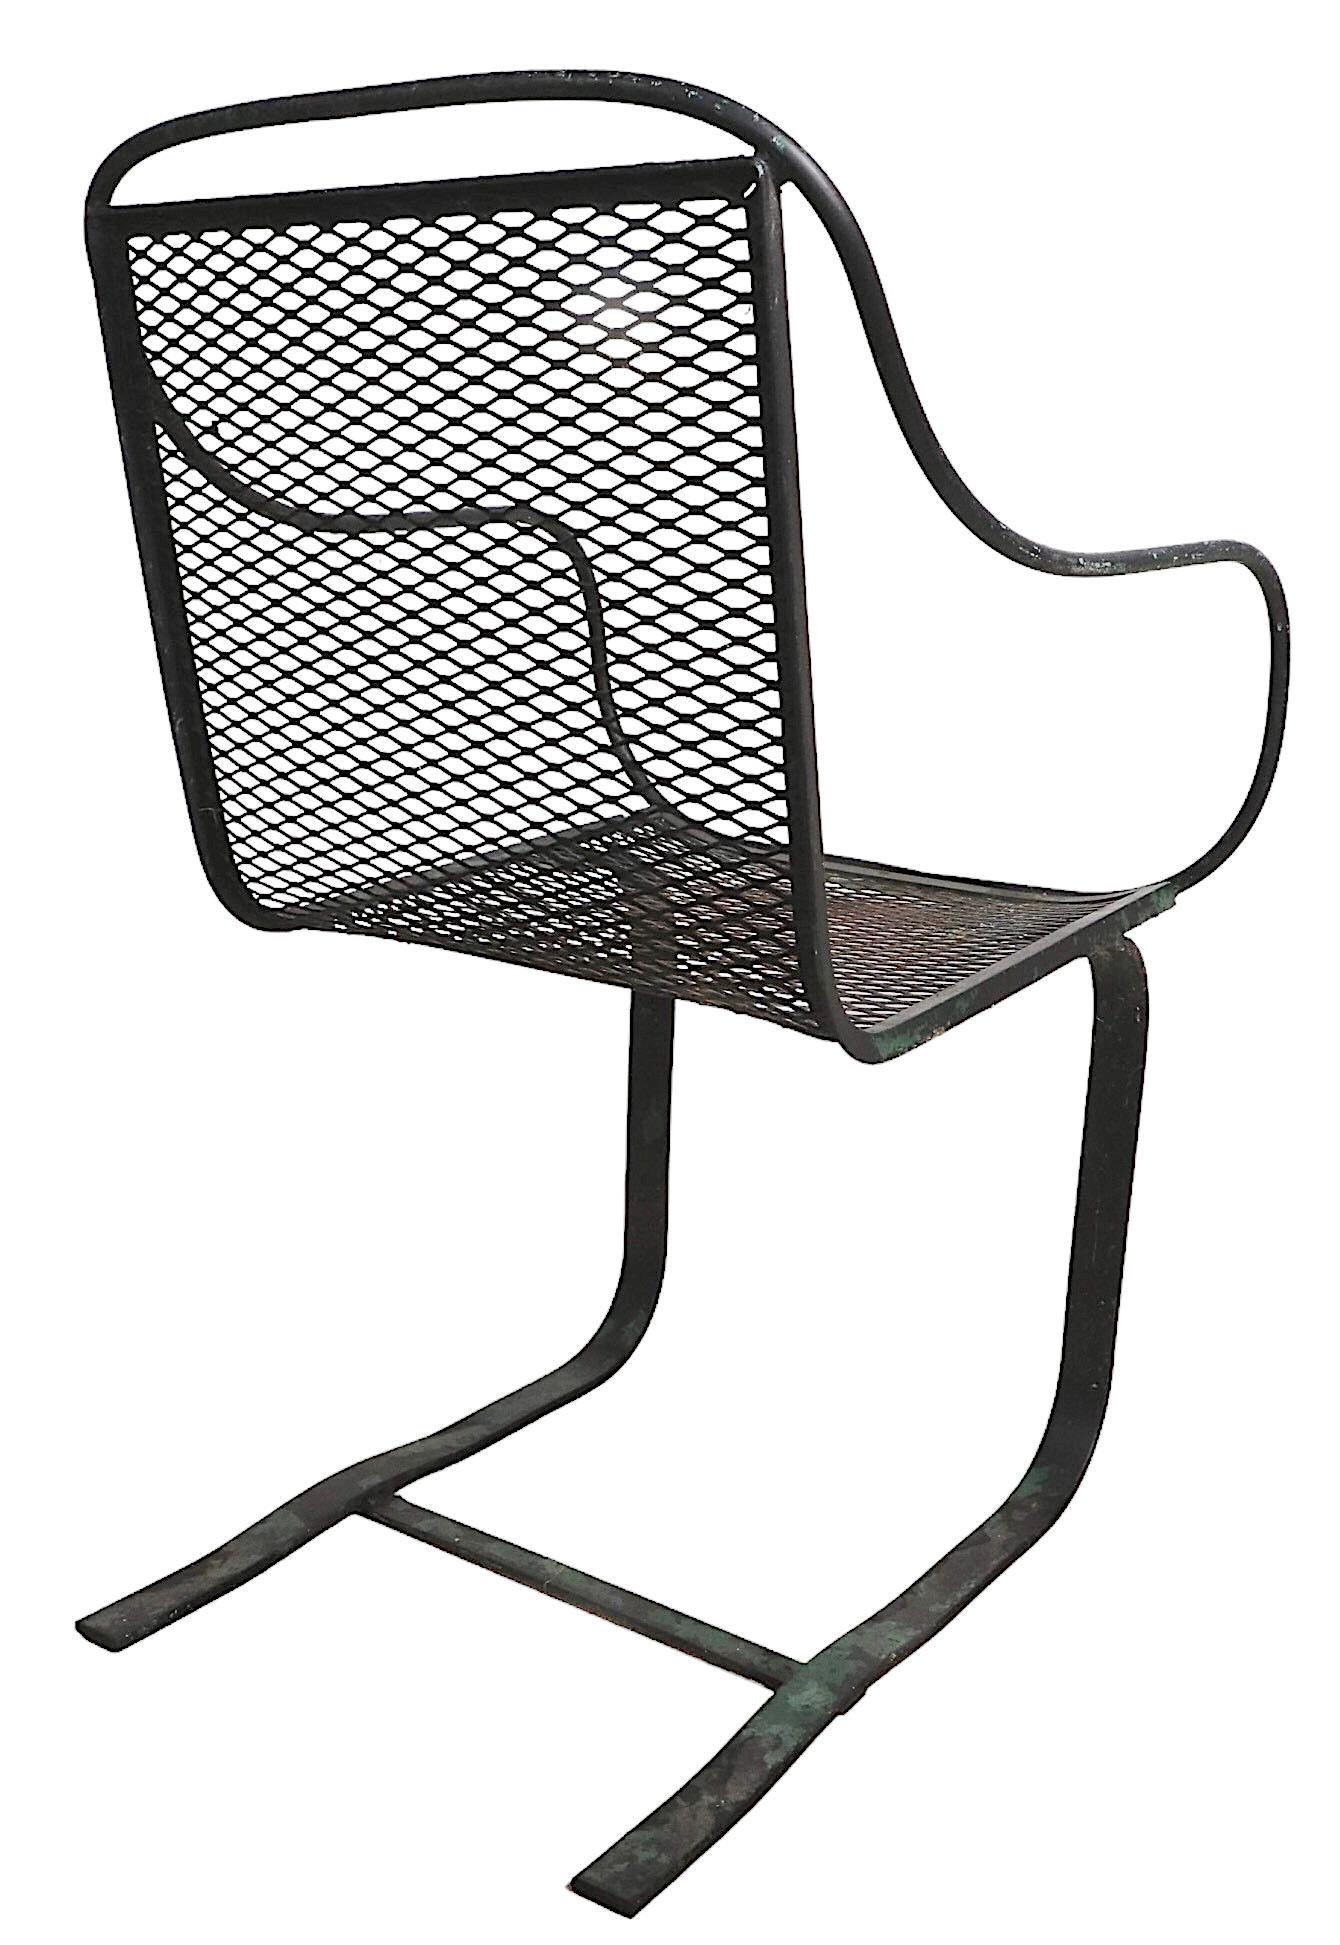 Chic architectural cantilevered mid century lounge arm chair, attributed to Salterini. The chair has a wrought iron frame, cantilevered spring base, and continuous metal mesh seat and back. 
Total H 33.5 x Arm H 25.5 x Seat H 16 x W 21 x D 21.5